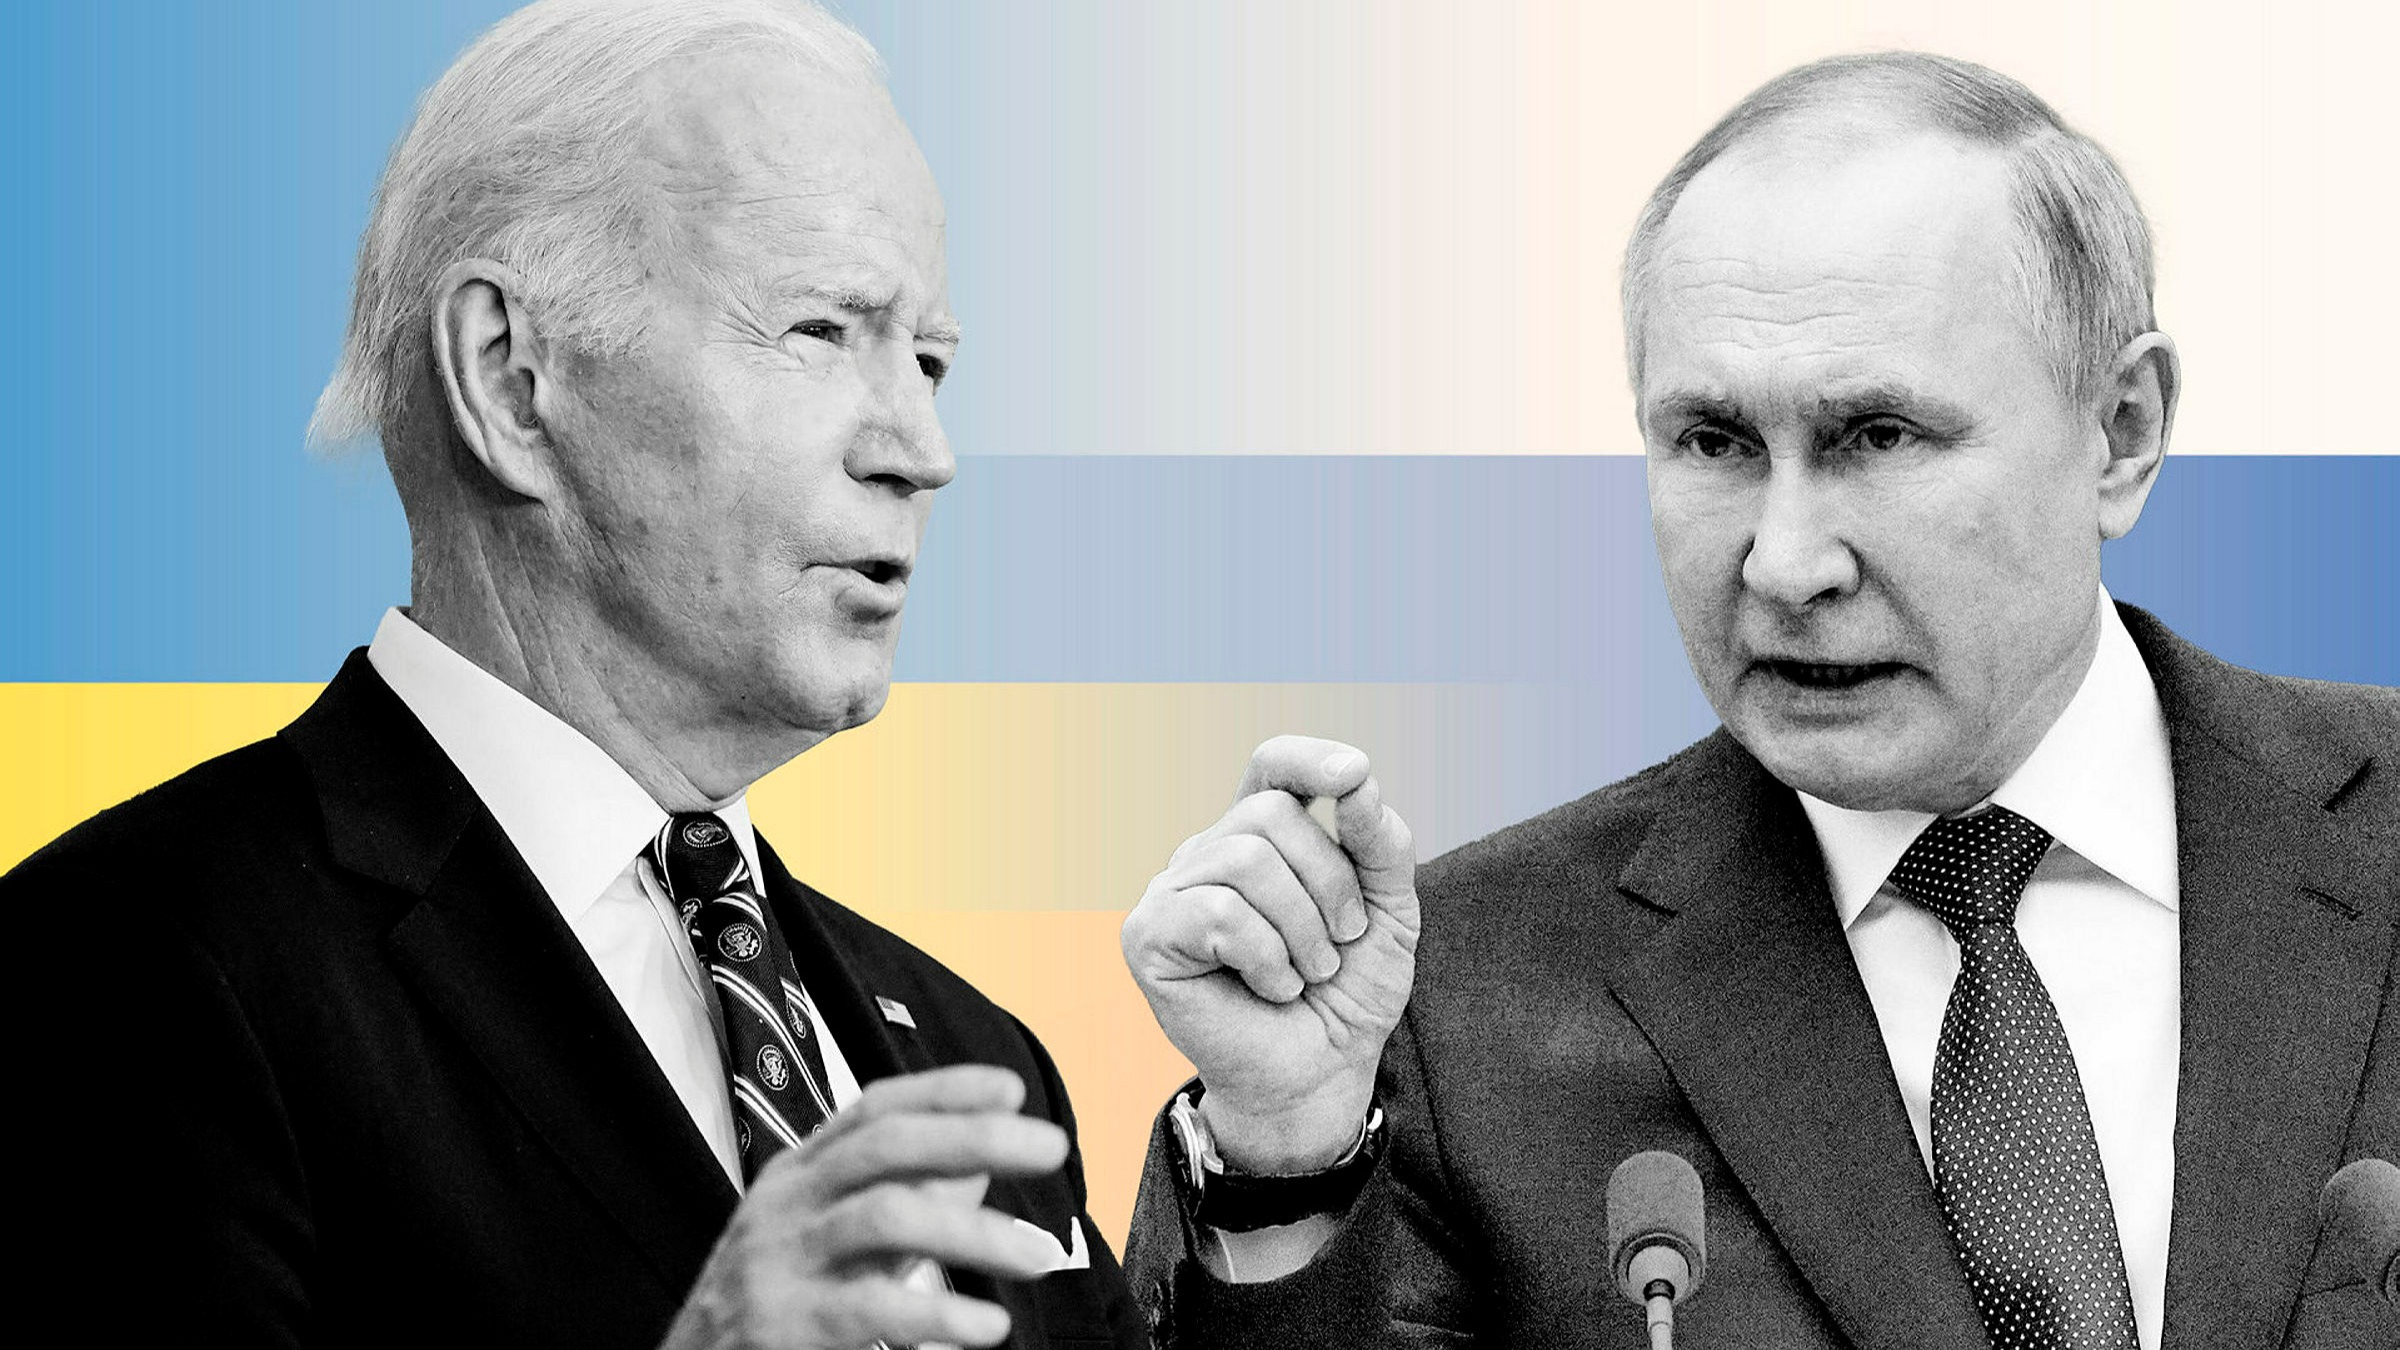 For the G20 conference, Biden lays down requirements for a meeting with Putin